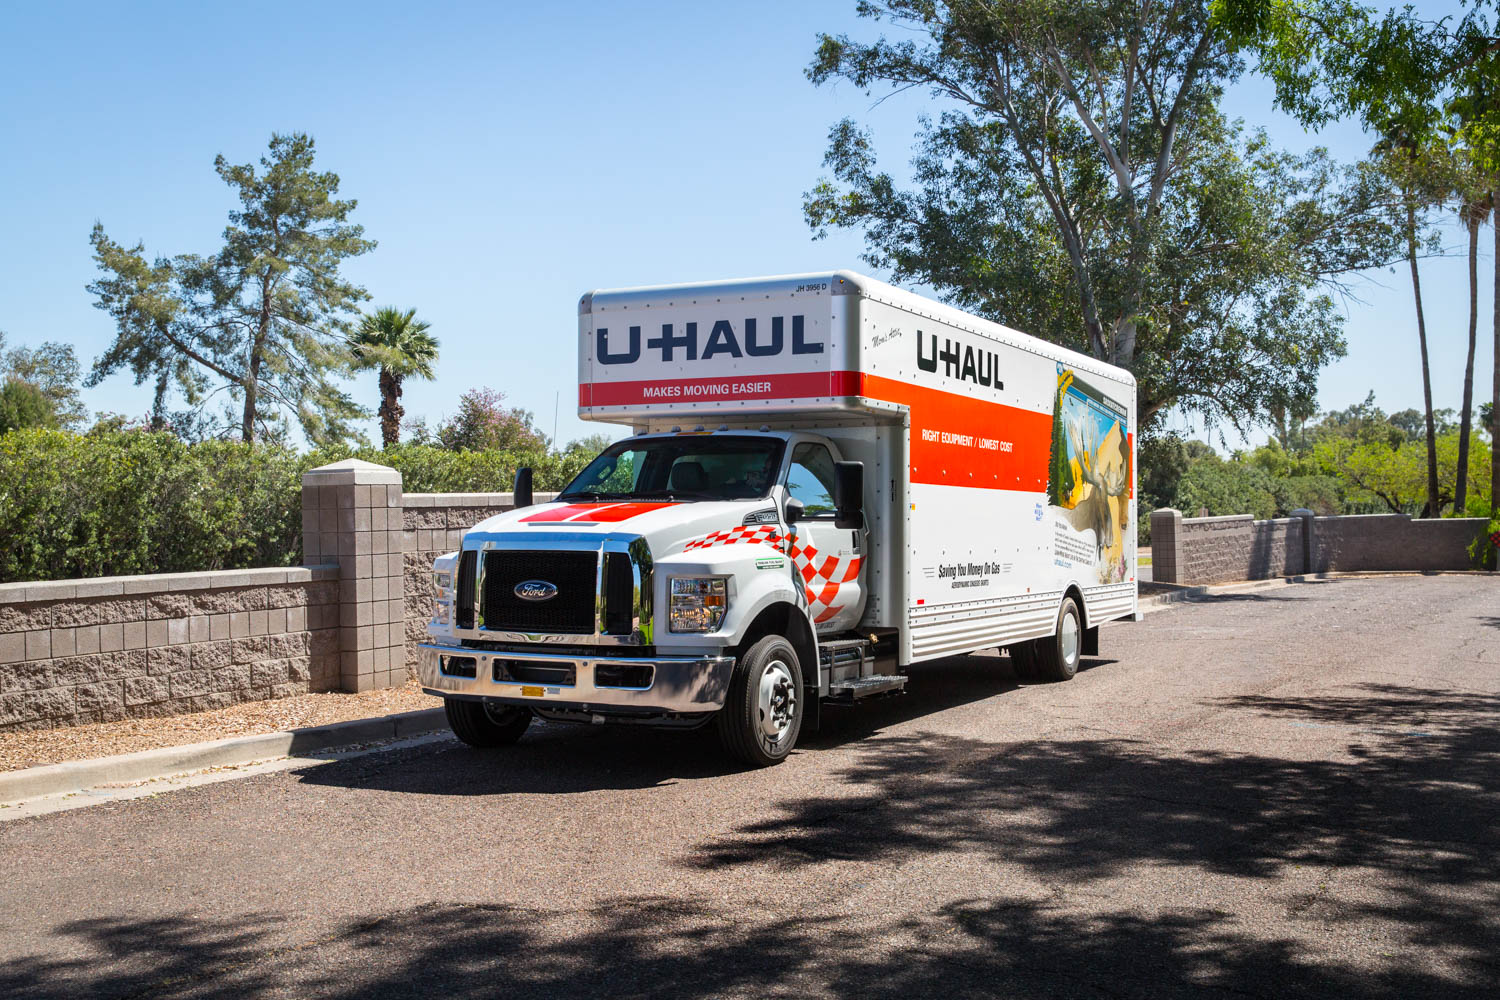 2020 Migration Trends: FLORIDA is the U-Haul No. 3 Growth State